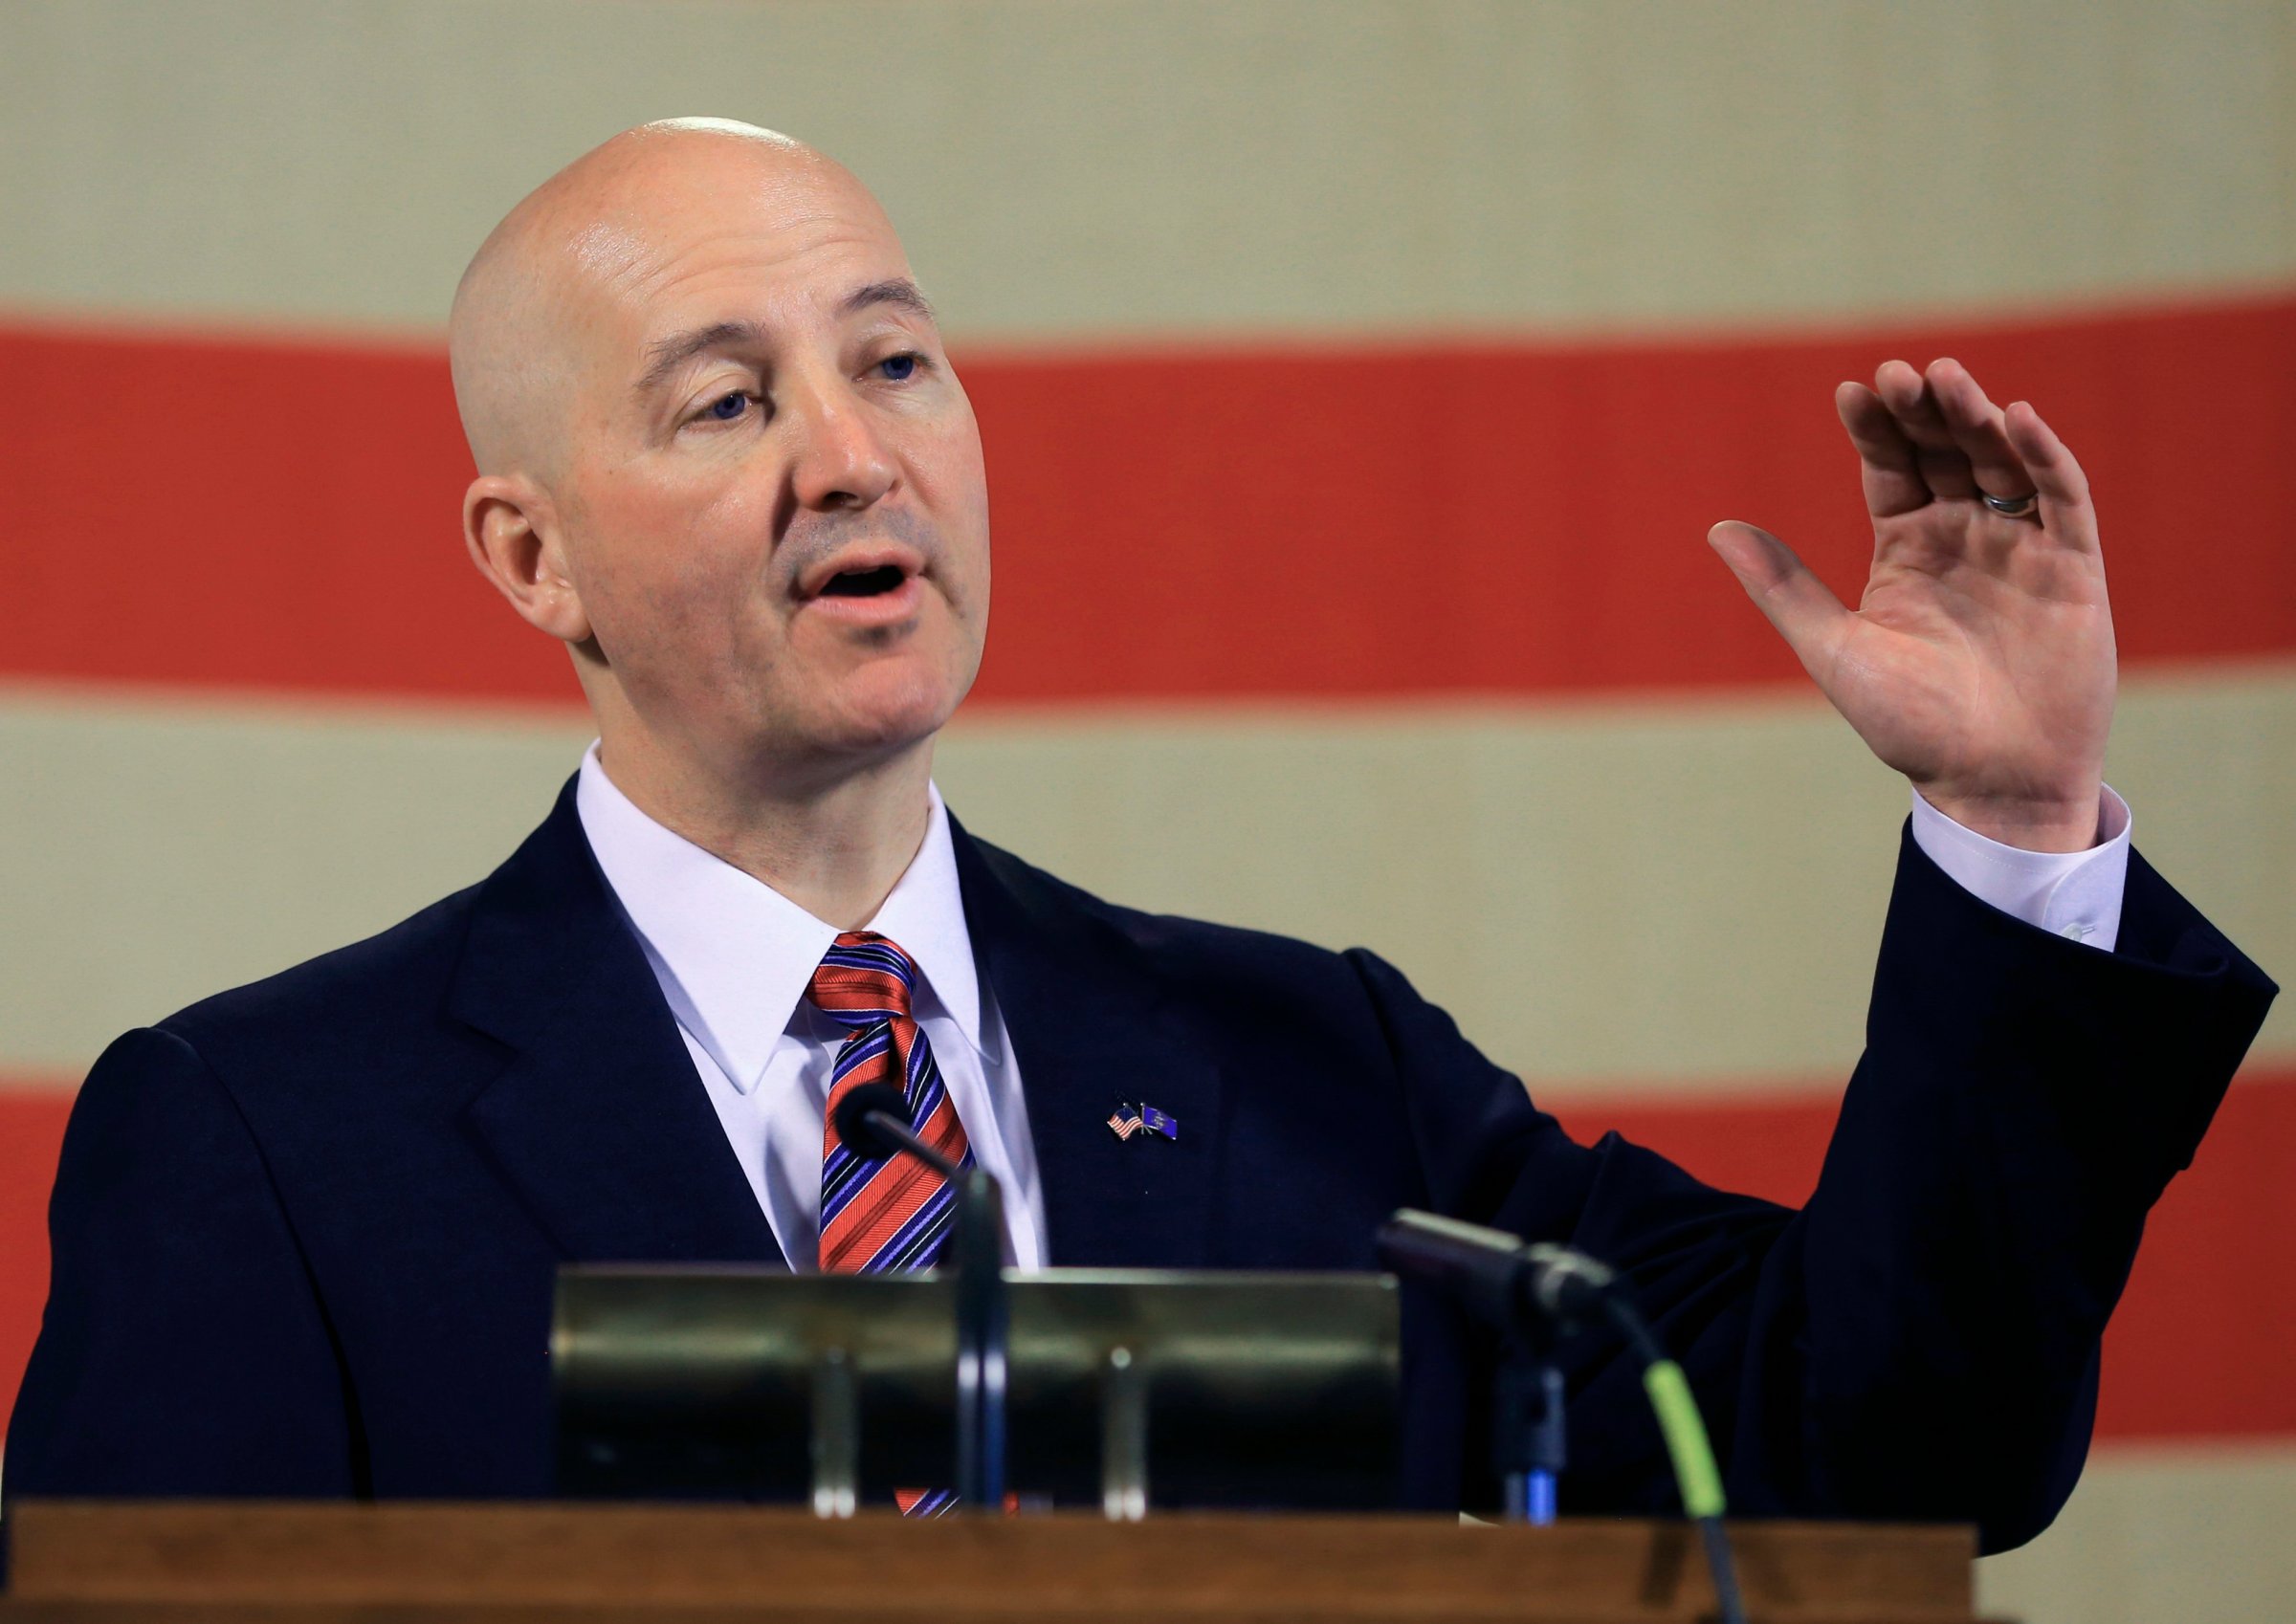 Neb. Gov. Pete Ricketts gestures during a news conference in Lincoln, Neb. on May 20, 2015.